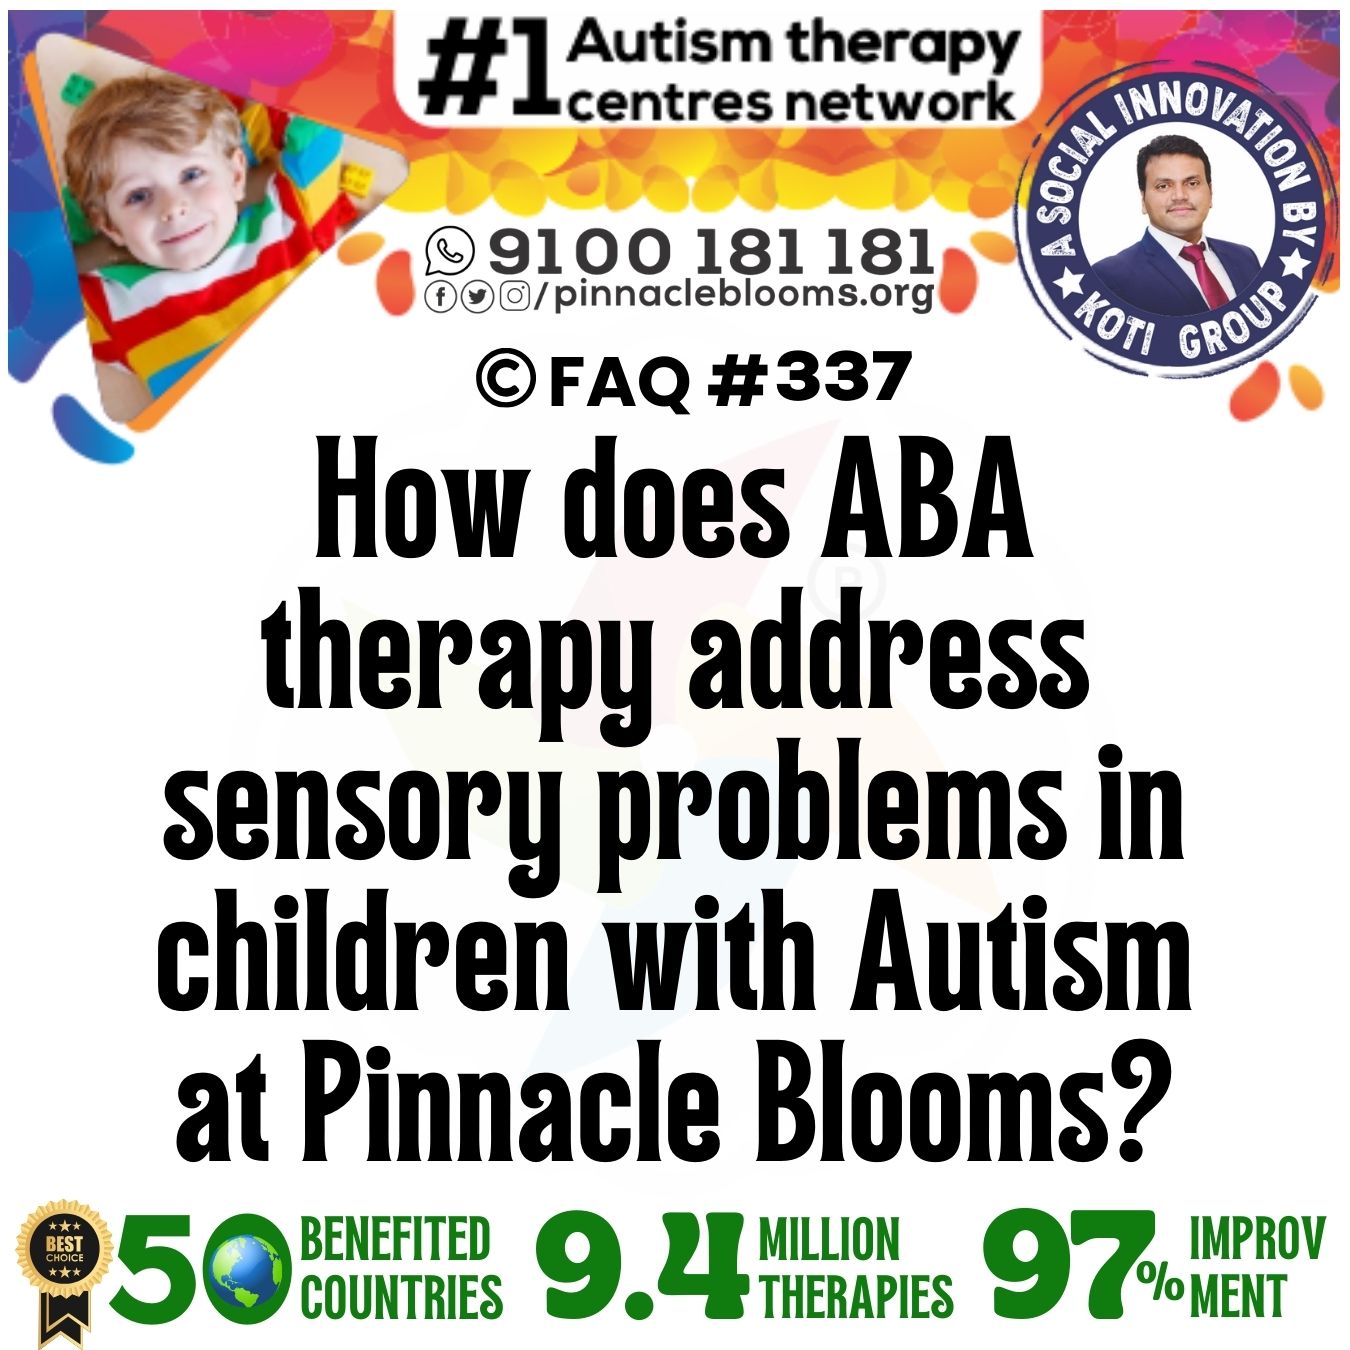 How does ABA therapy address sensory problems in children with Autism at Pinnacle Blooms?